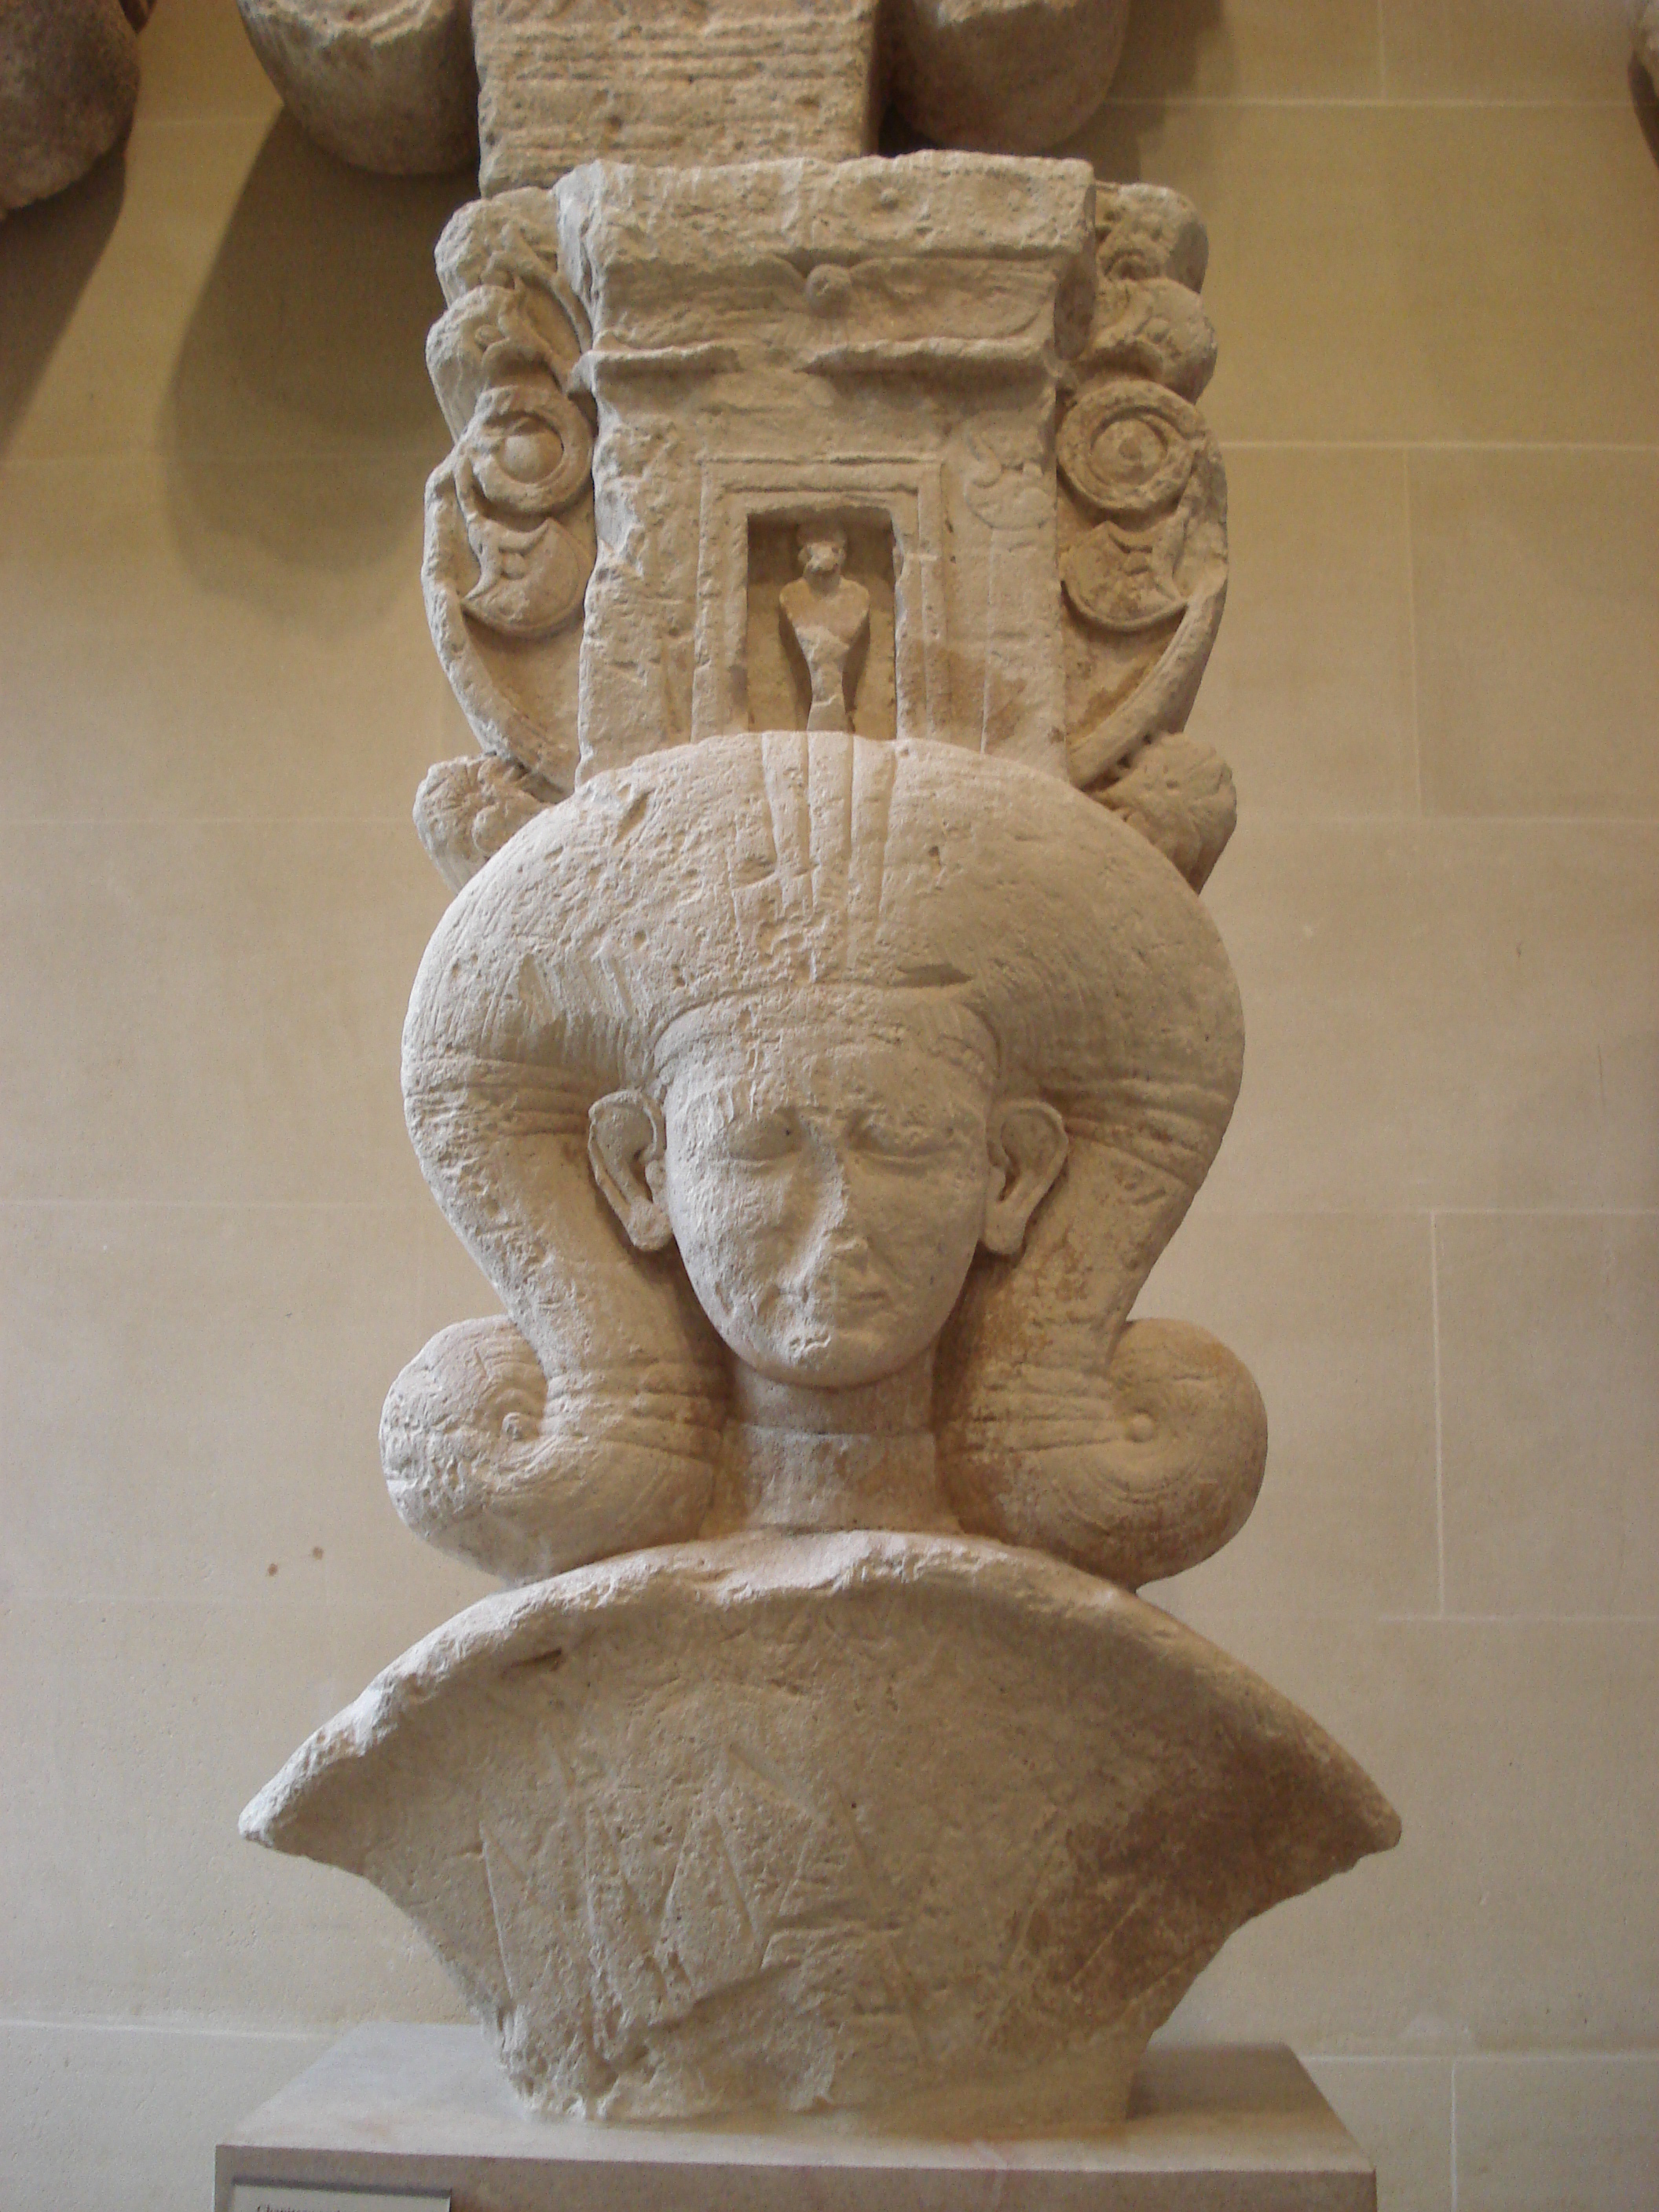 2a - Phoenician artifact of goddess Hathor, statue in the Louvre